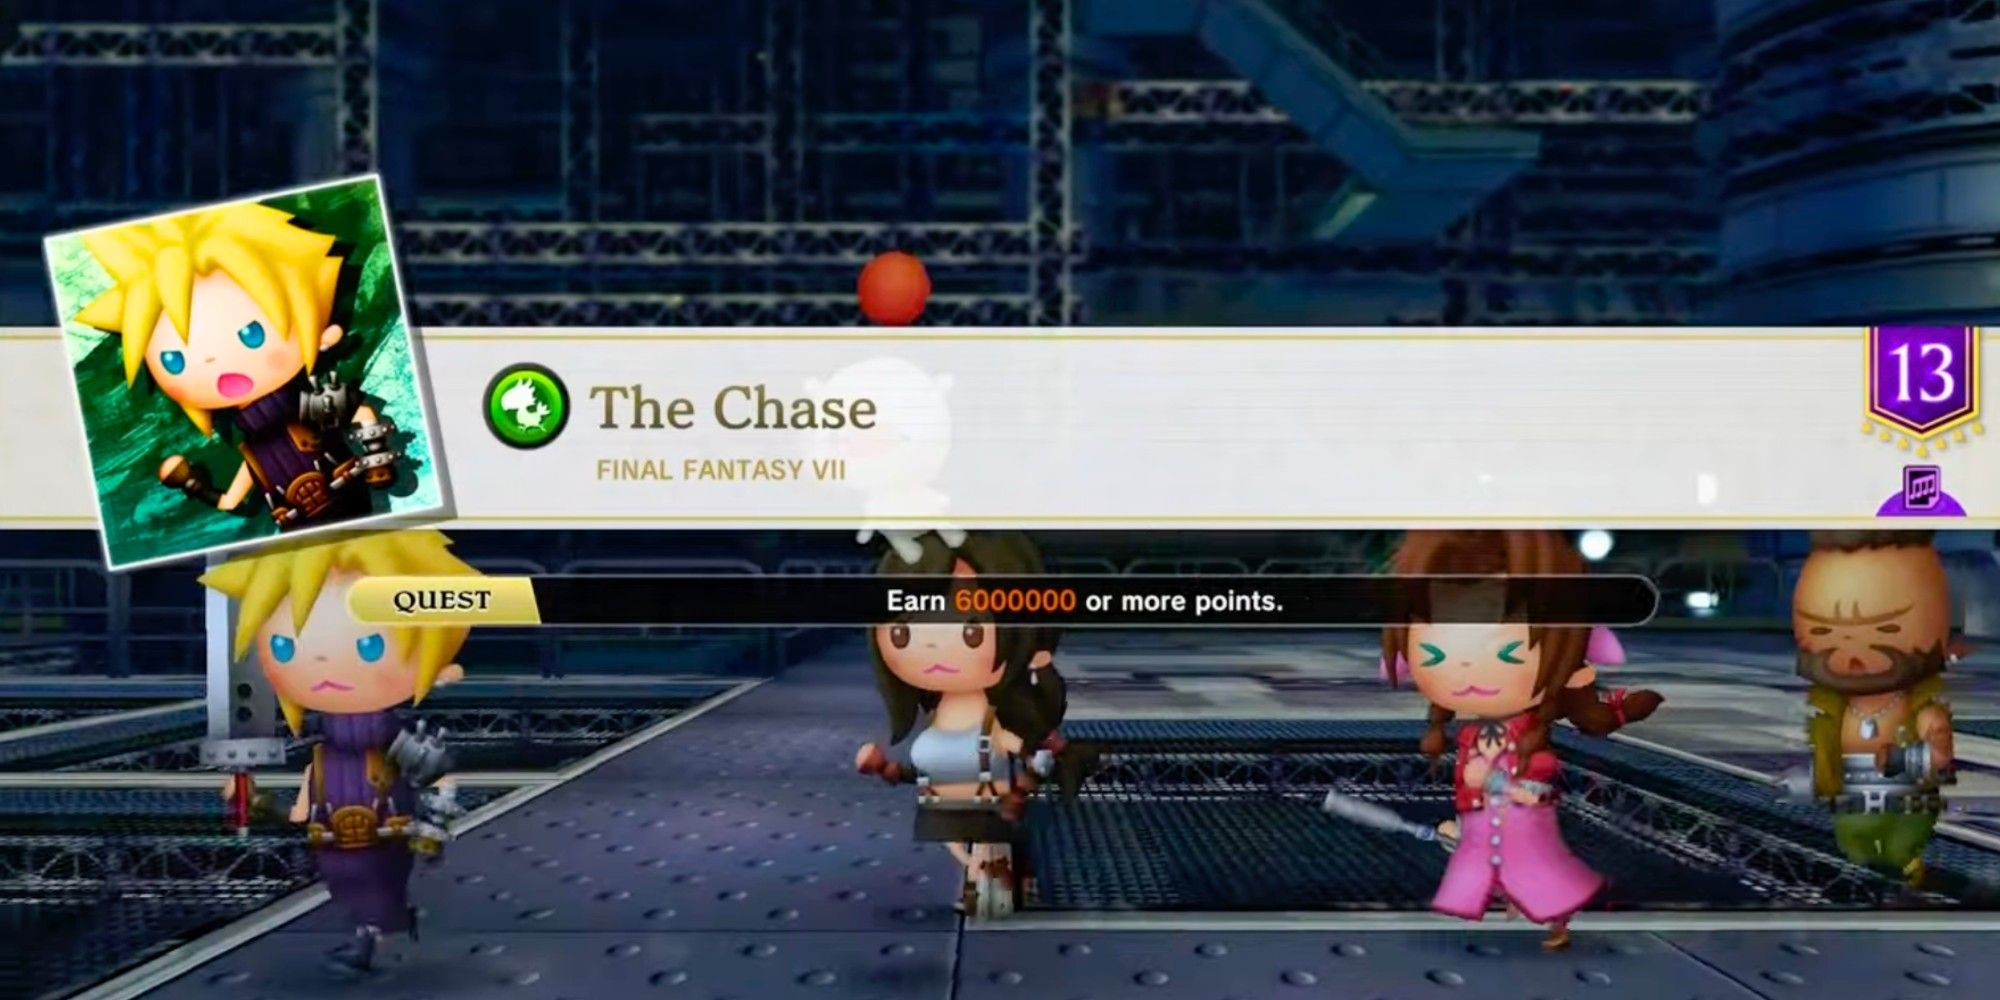 Cloud, Tifa, Aerith, and Barret are behind the title onscreen against an industrial setting